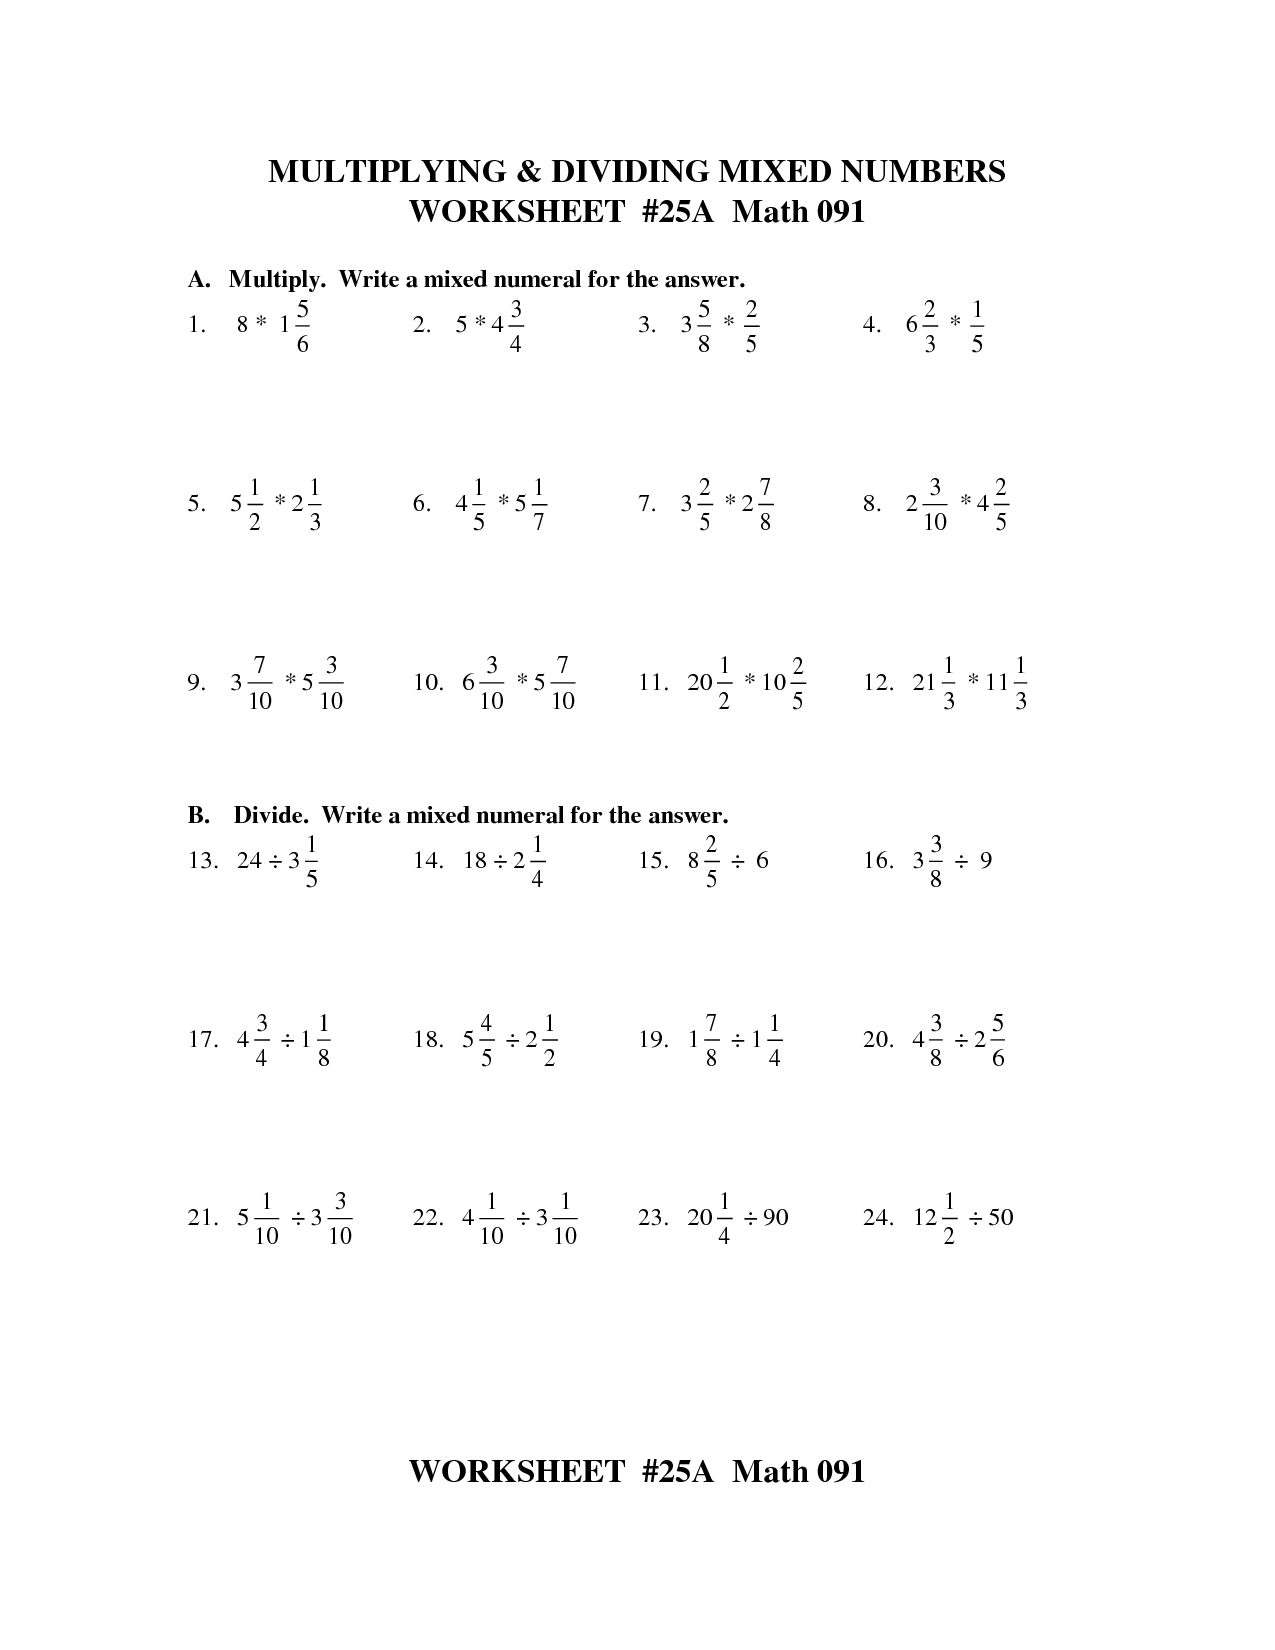 8 Best Images of Multiplying And Dividing Fractions Worksheets  Multiplying Dividing Fractions 